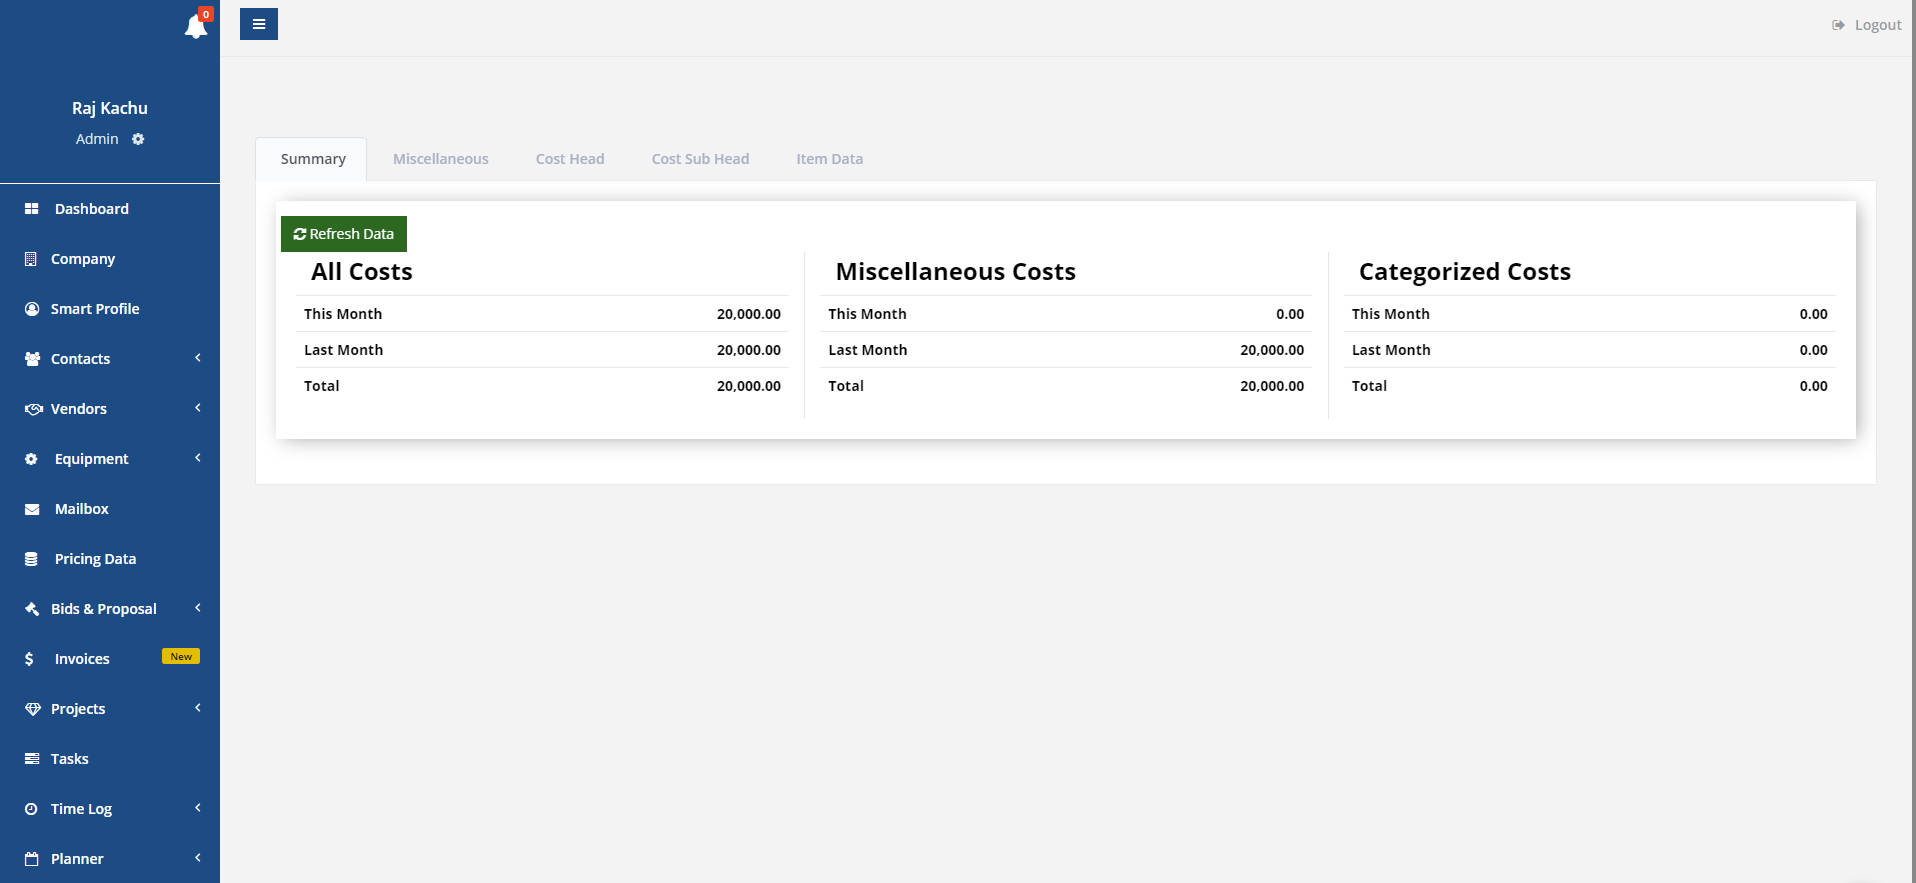 Manage your project costs in one place